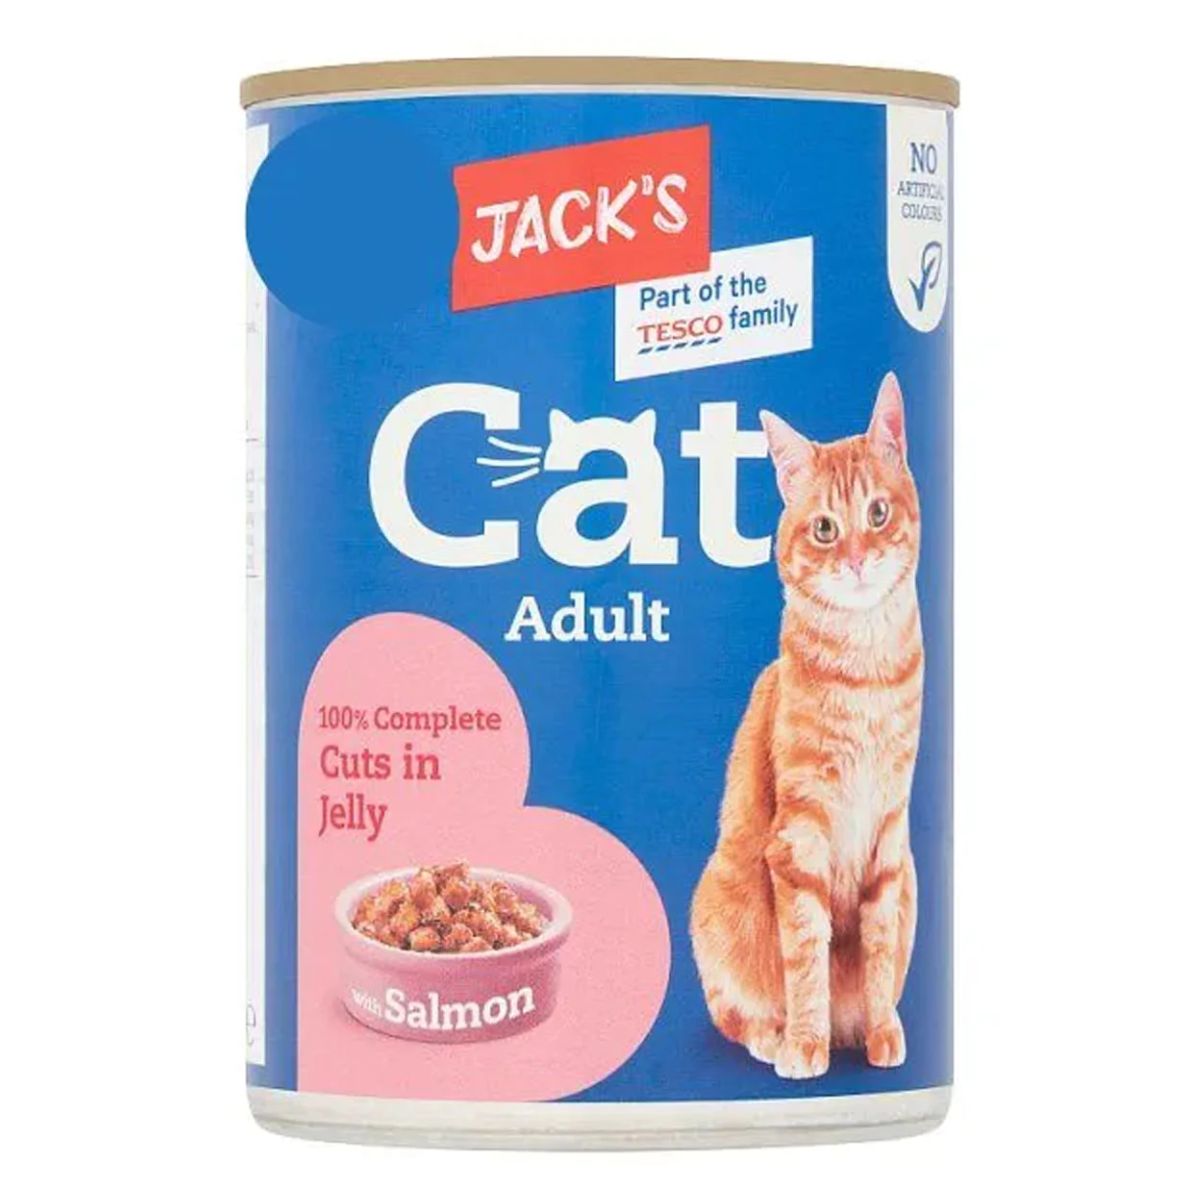 Jacks - Cat Adult 100% Complete Cuts in Jelly with Salmon - 415g canned food.